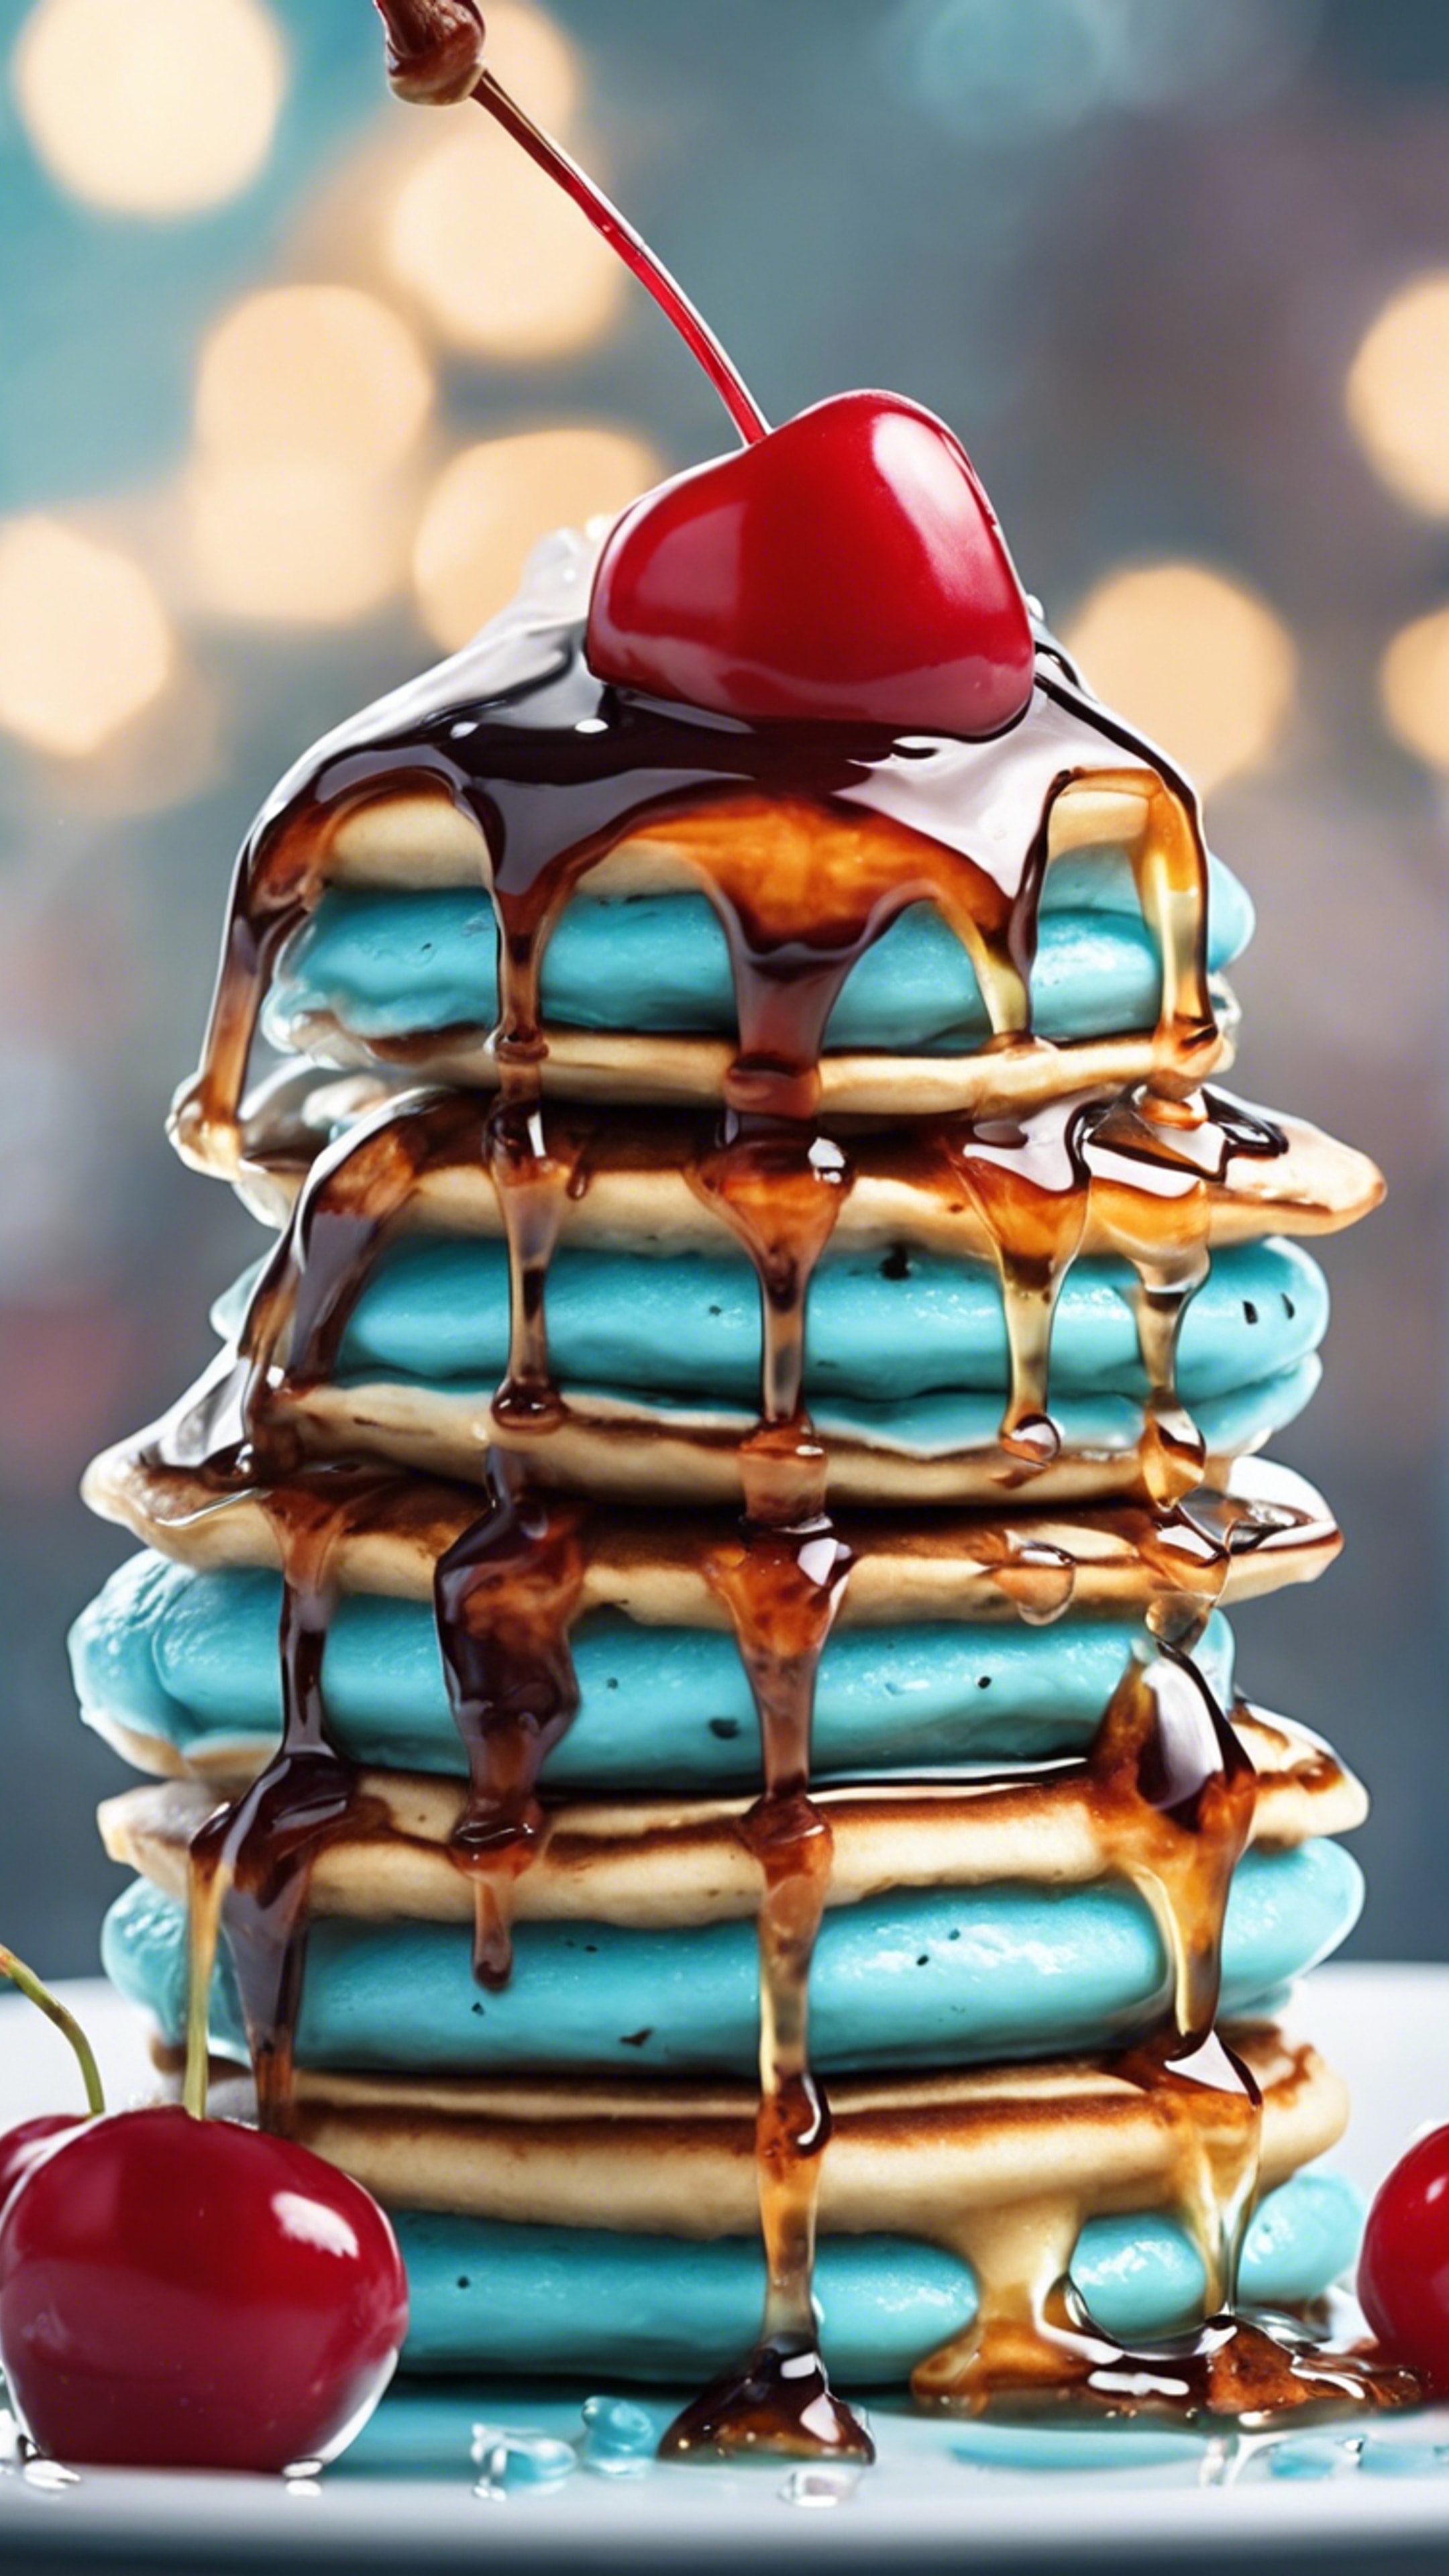 A stack of kawaii light blue pancakes dripping with syrup and a cherry on top. Behang[05c3a9af3a95463c8379]